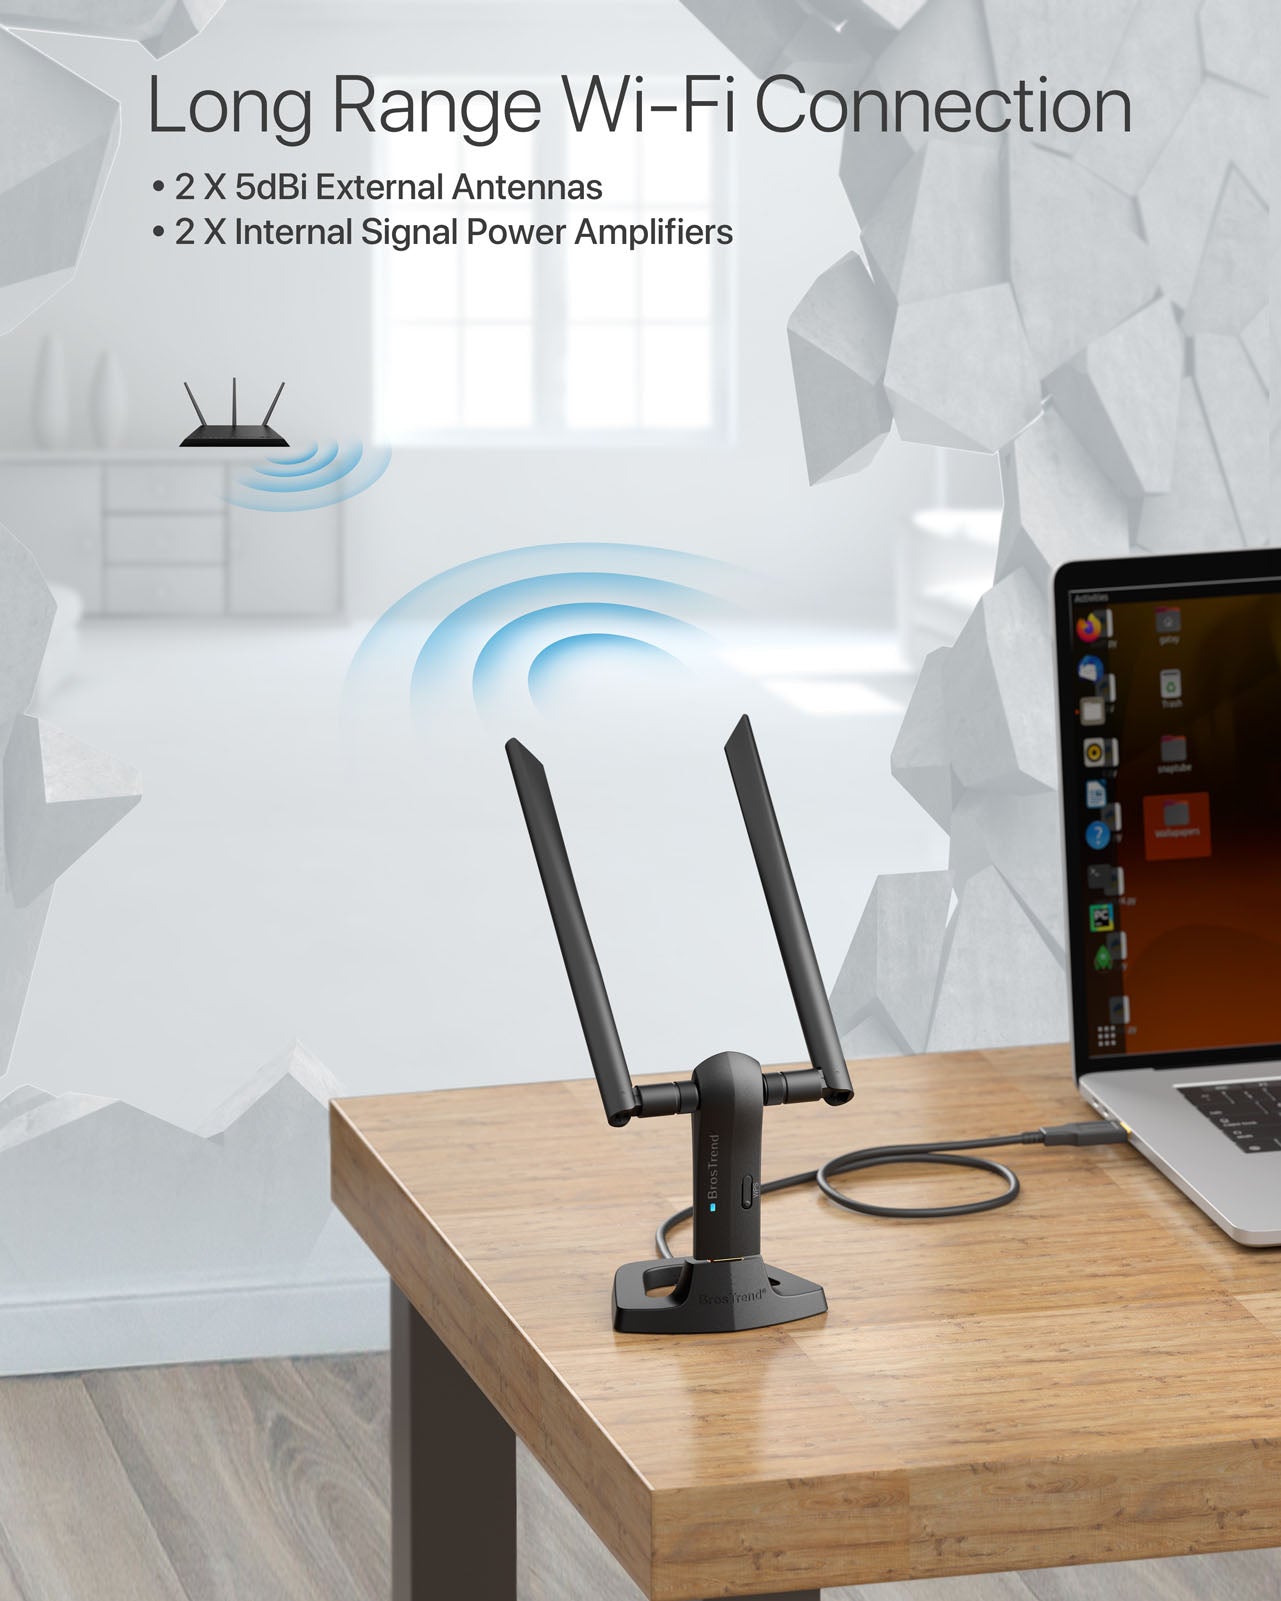 BrosTrend 1200Mbps Linux Compatible USB WiFi Adapter Receives Stronger Signals with External High Gain Antennas and Internal Signal Power Amplifiers